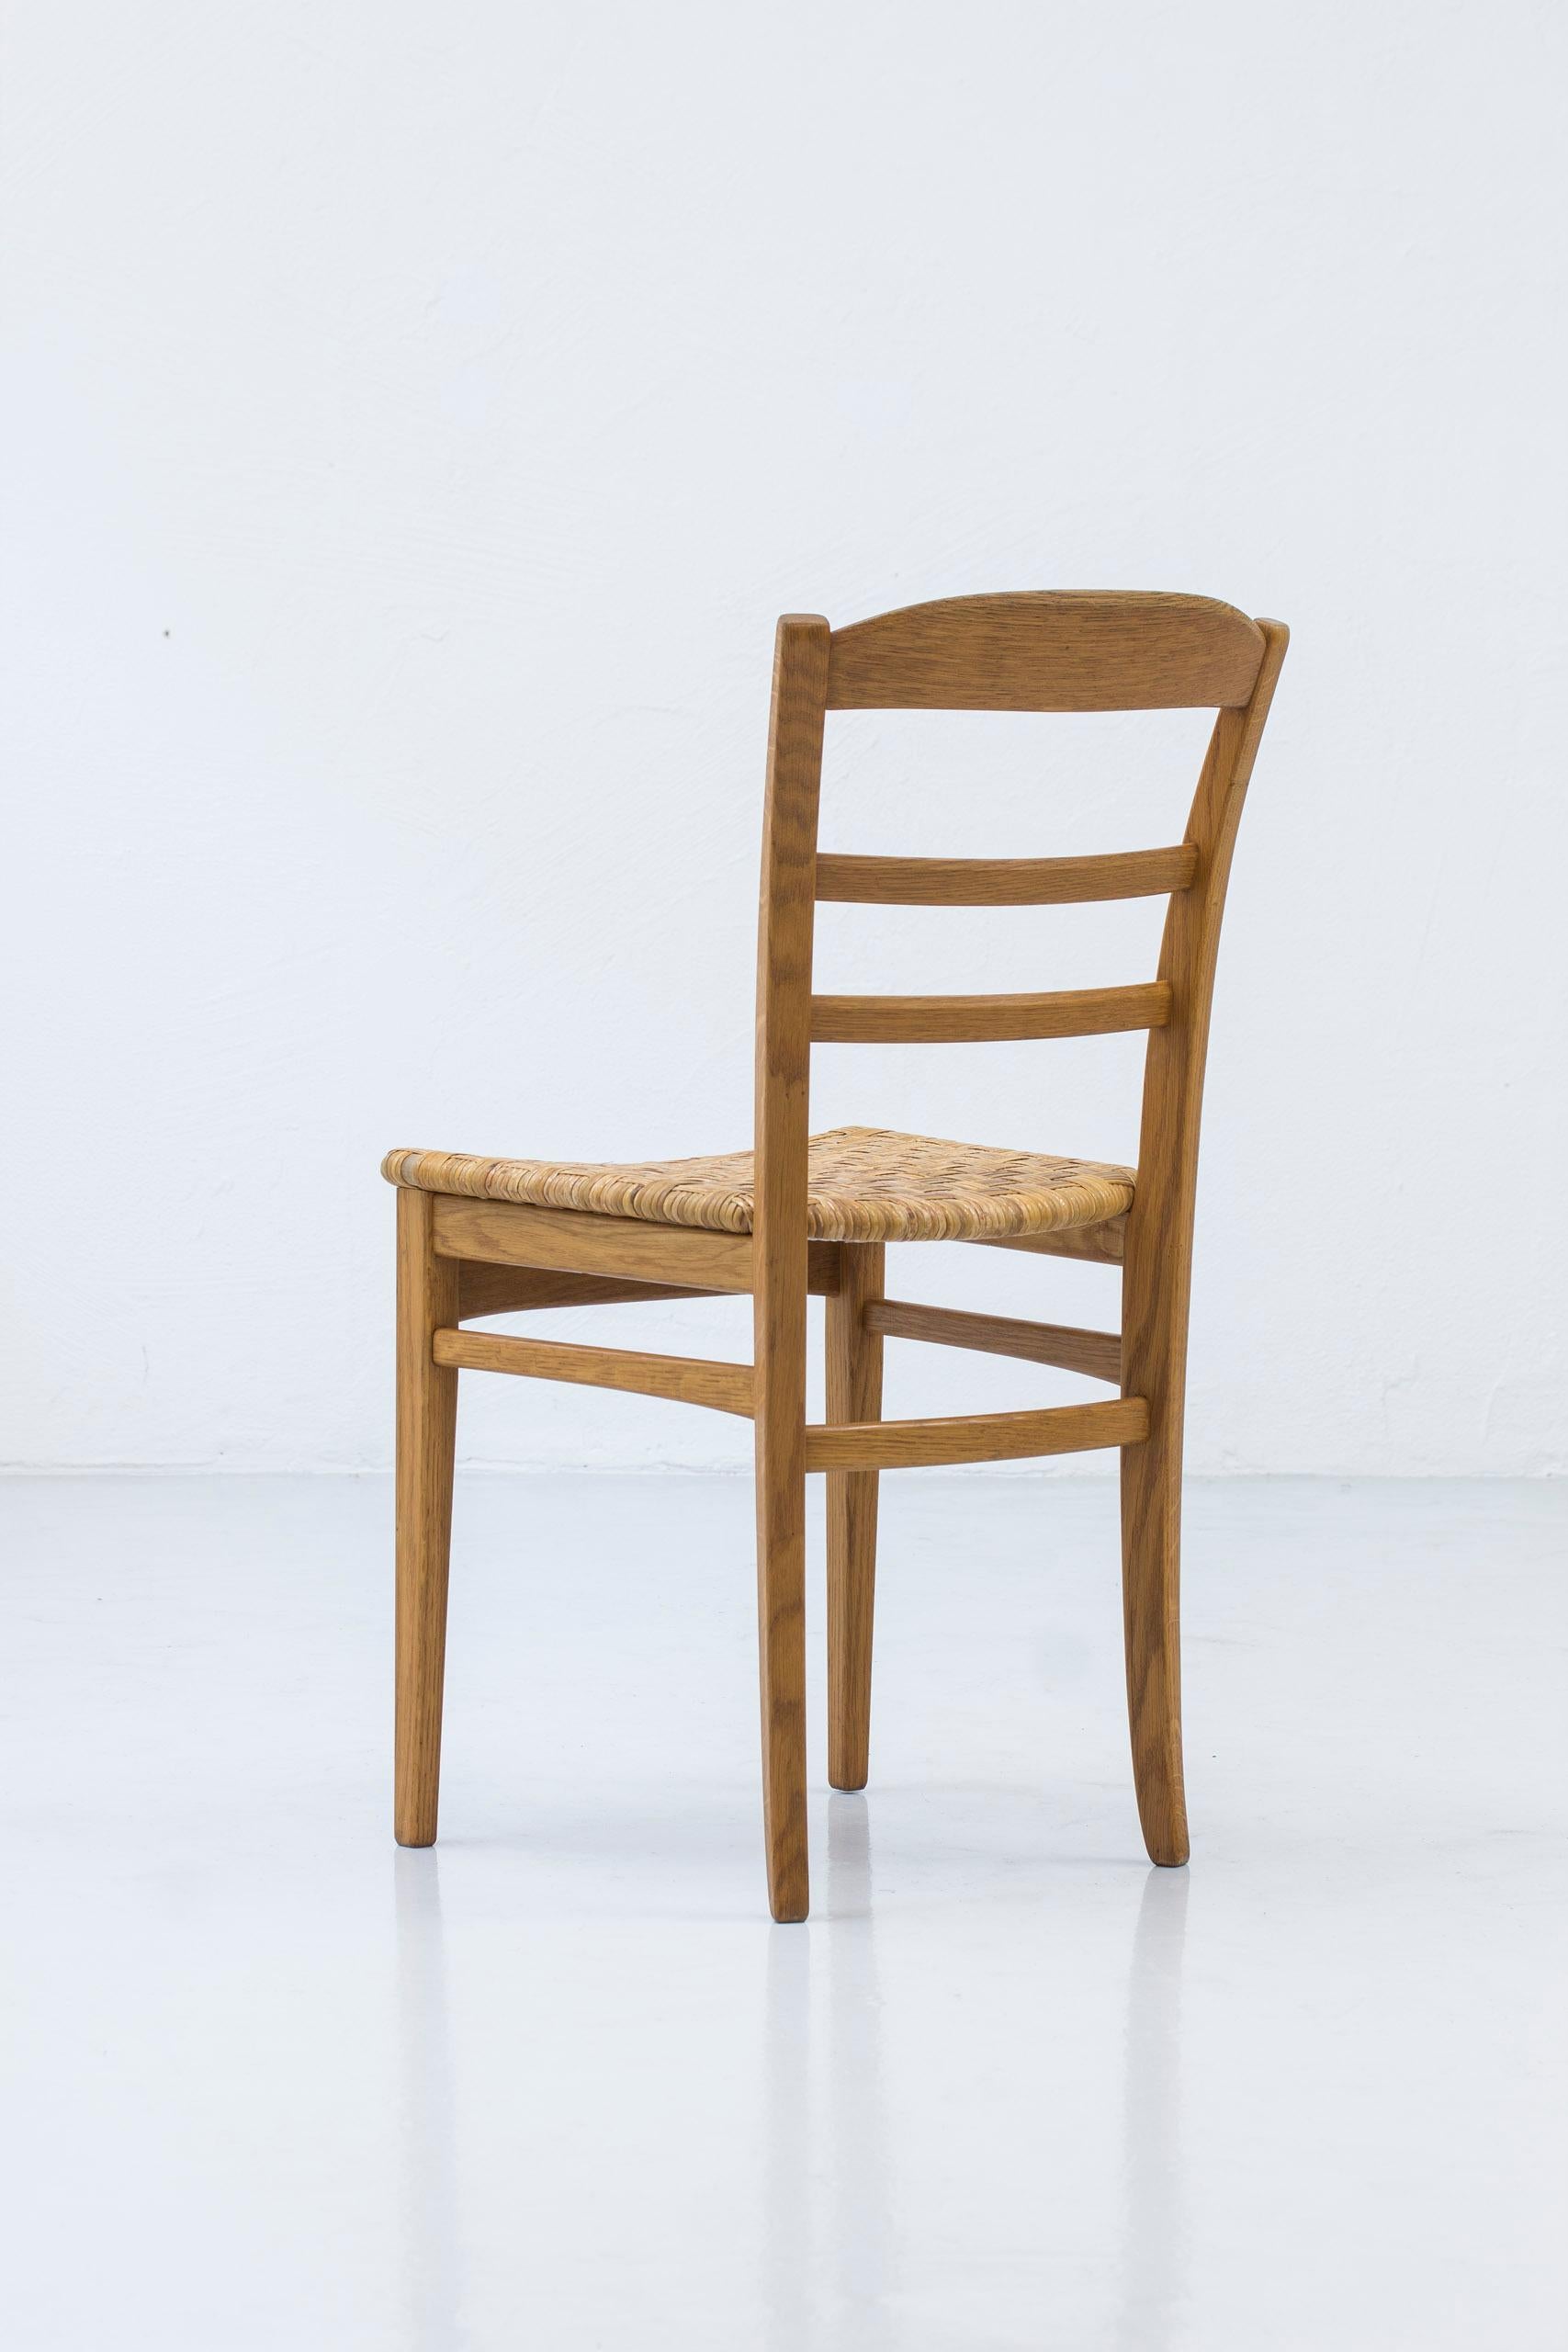 Oak and Cane Weave Dining Chairs by Carl Malmsten, Swedish Modern, 1950s For Sale 4